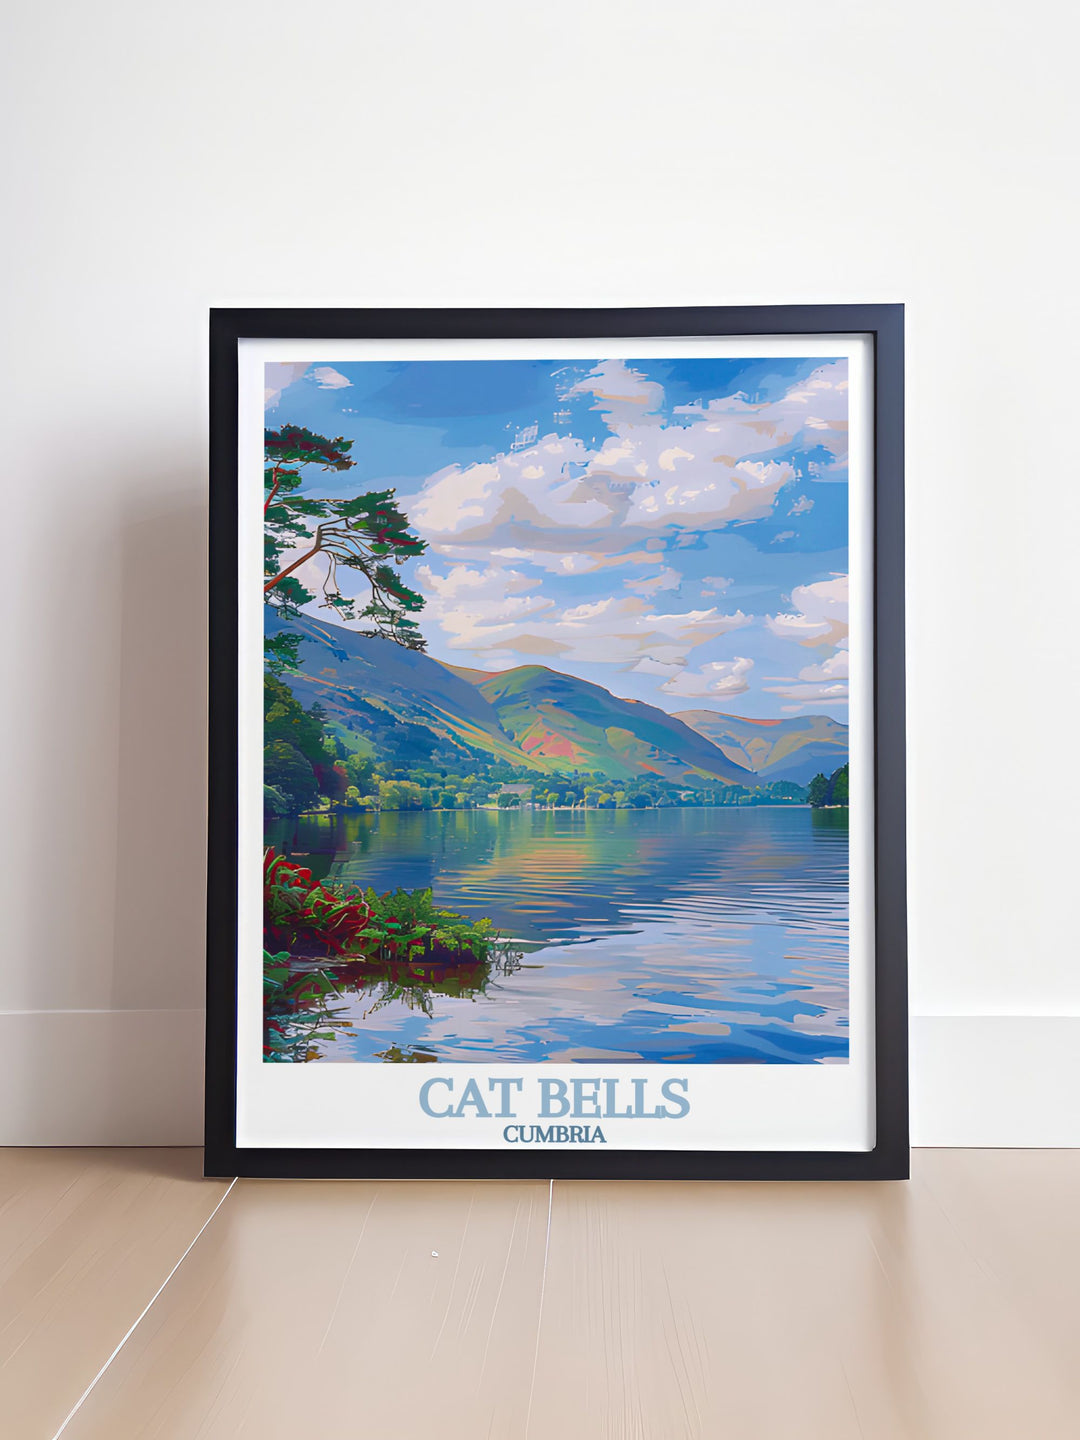 Derwentwater modern art print designed to add elegance to your home decor this travel poster features the stunning landscape of Cat Bells Cumbria a wonderful addition to any room and a great gift for nature enthusiasts.